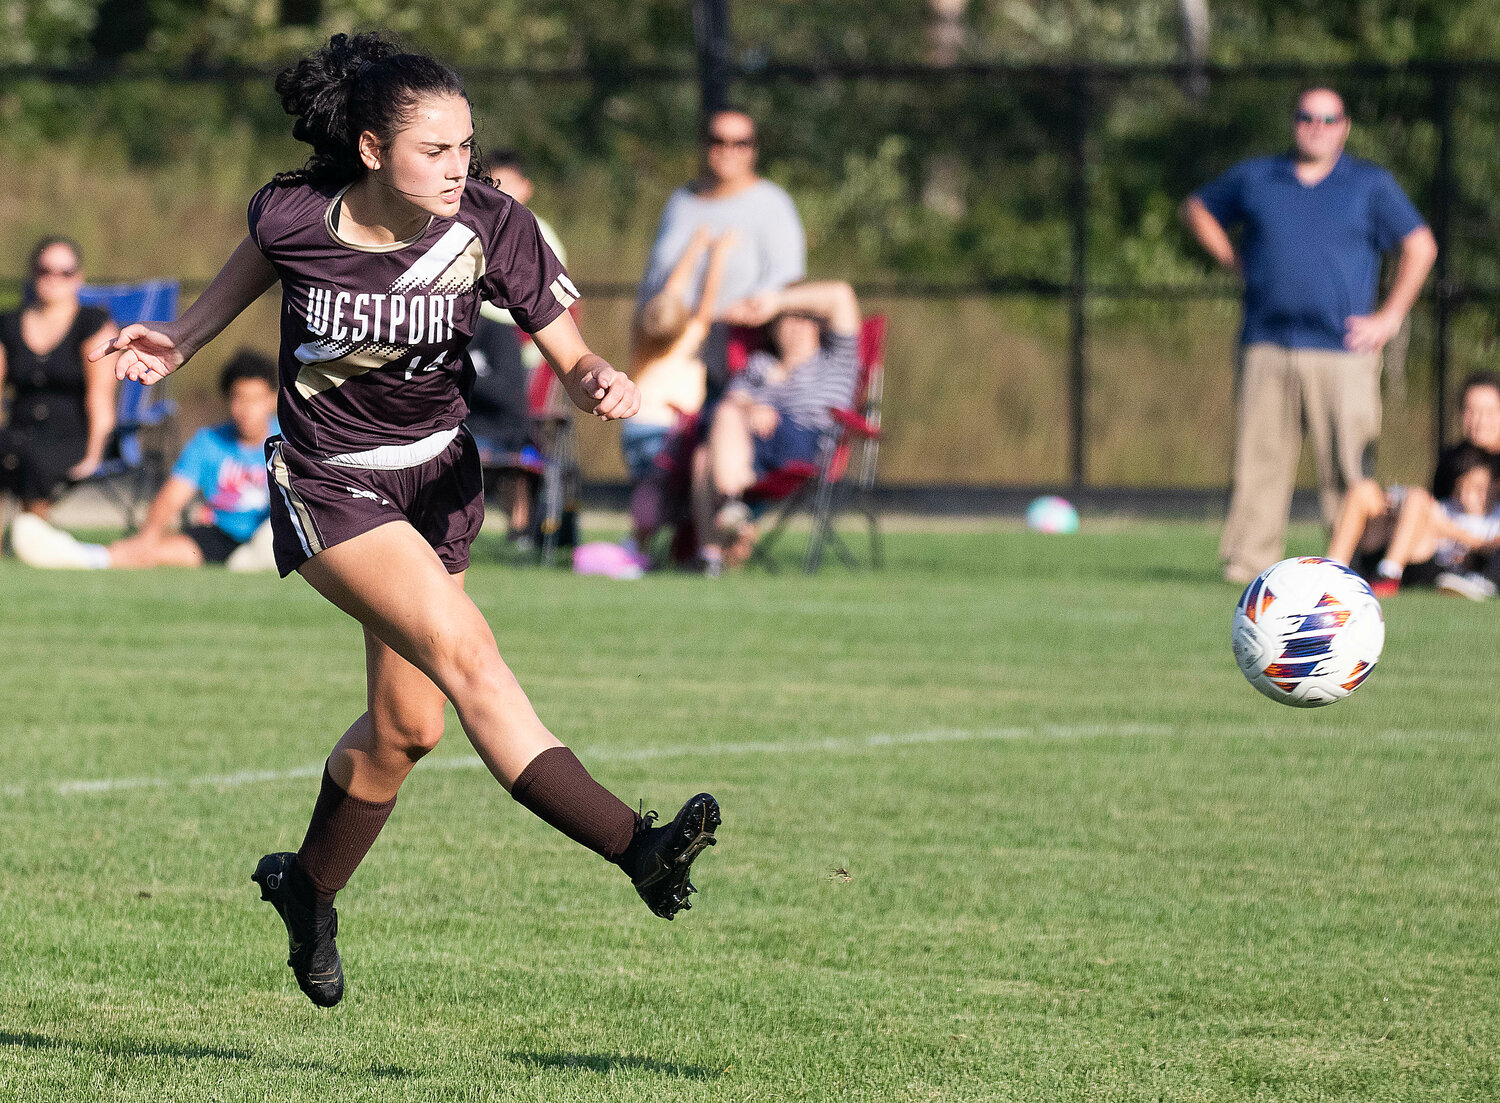 Senior captain Korynne Holden blasts a kick on goal during their home win over Wareham on Tuesday.